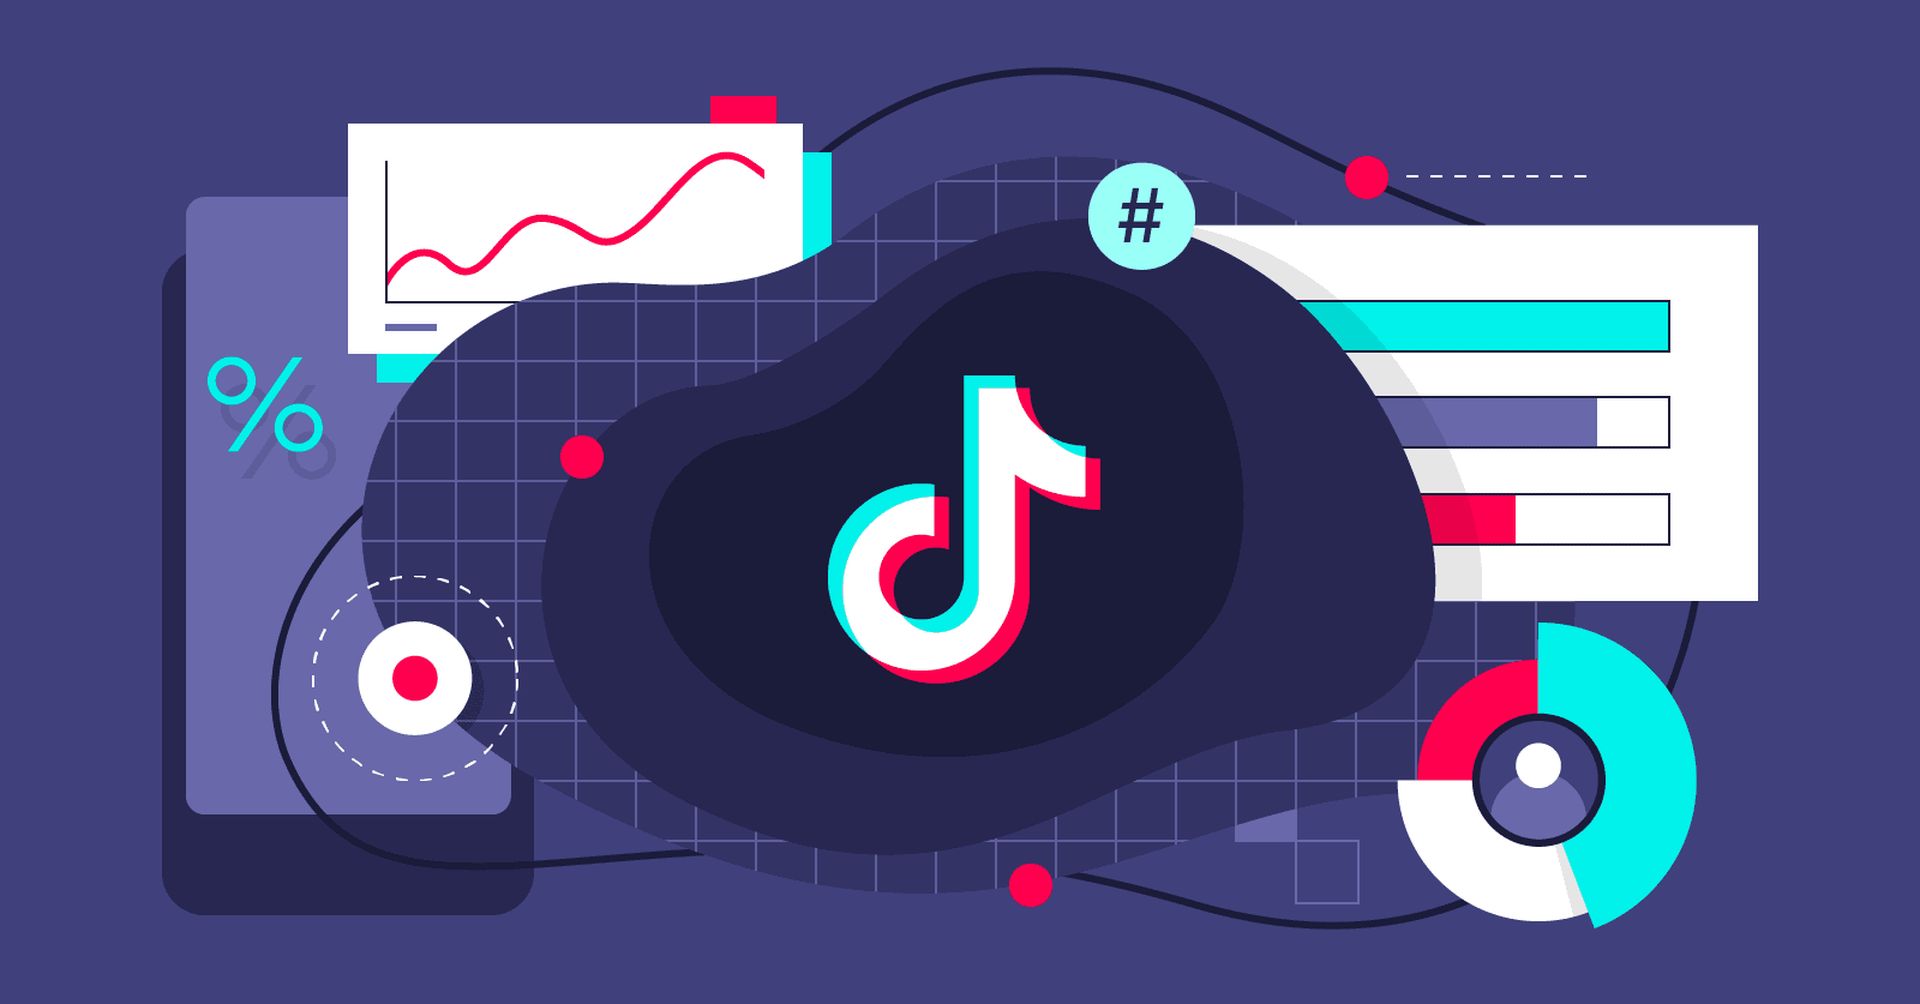 TikTok now has a very interesting filter that mirrors your face, and many are asking: 